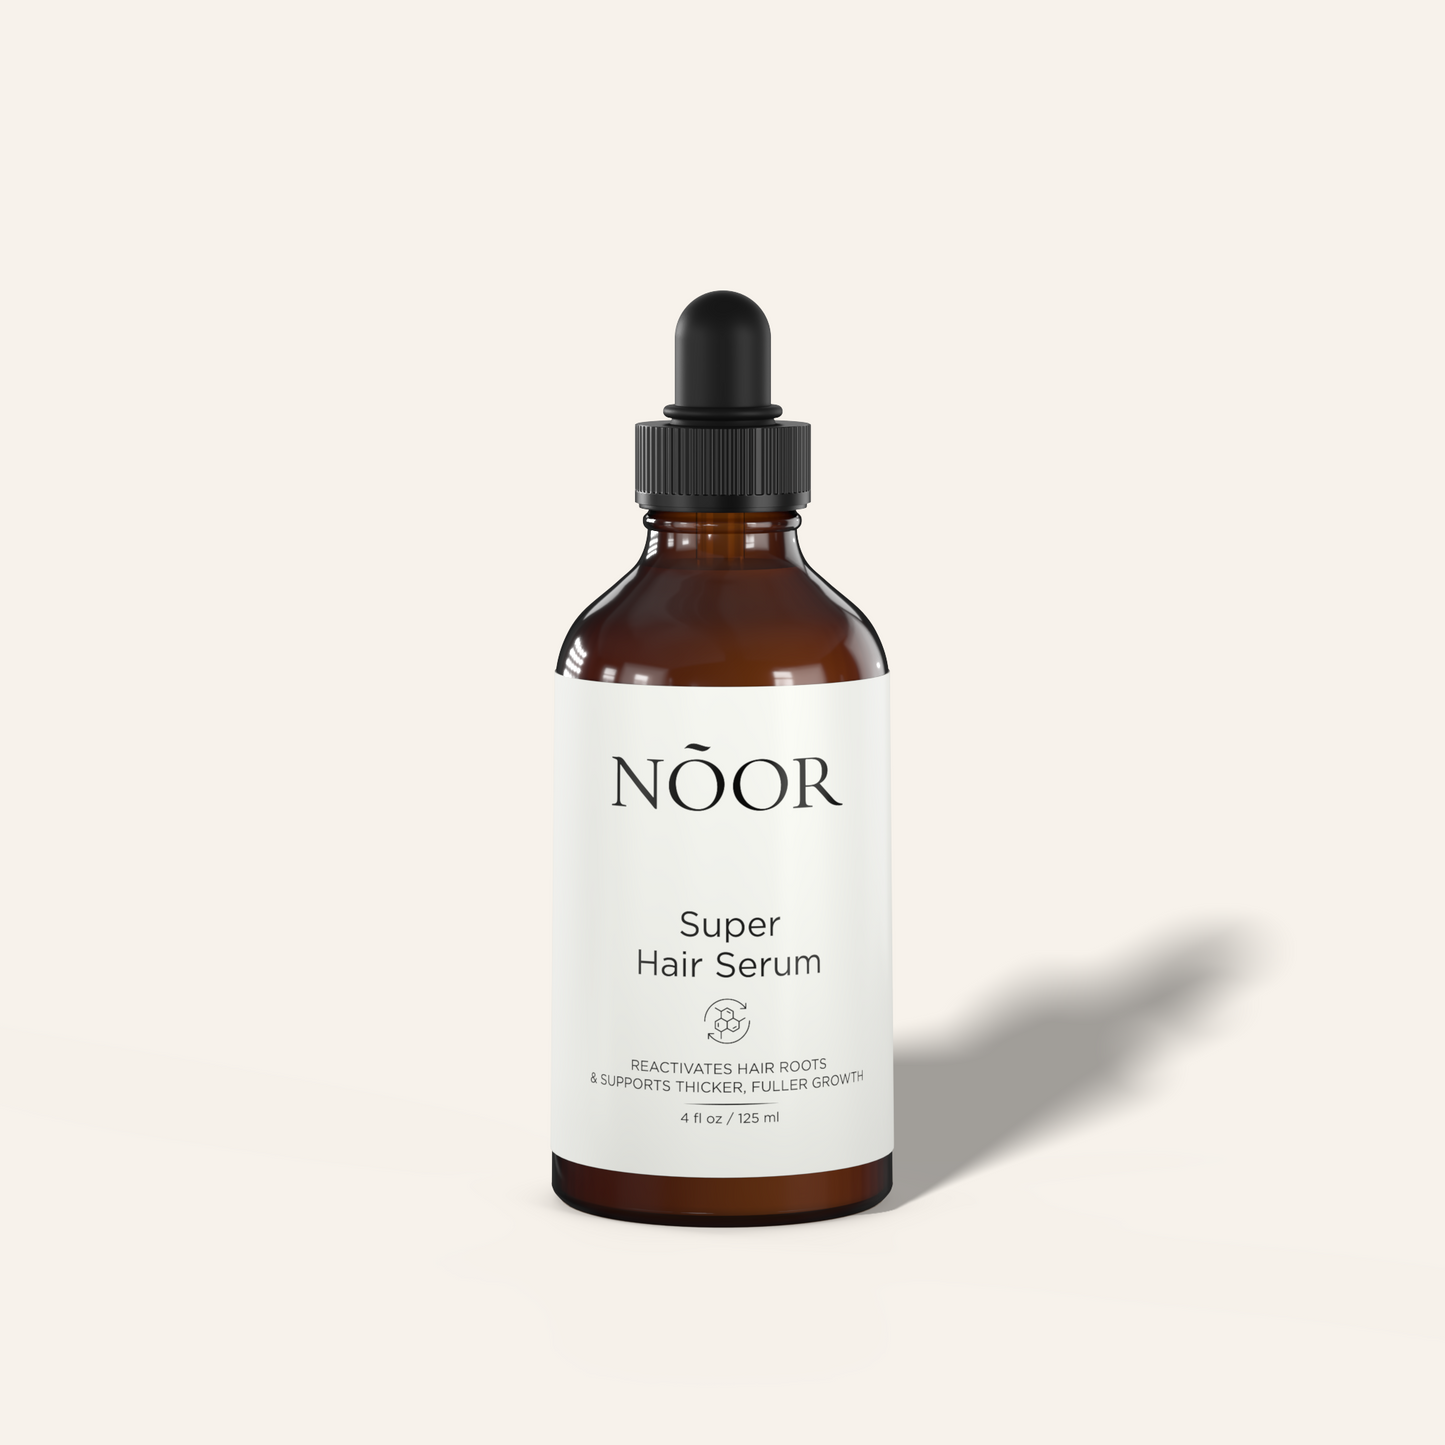 Super Hair Serum | 1 Month Subscription - Special Offer - EXTRA 10% OFF